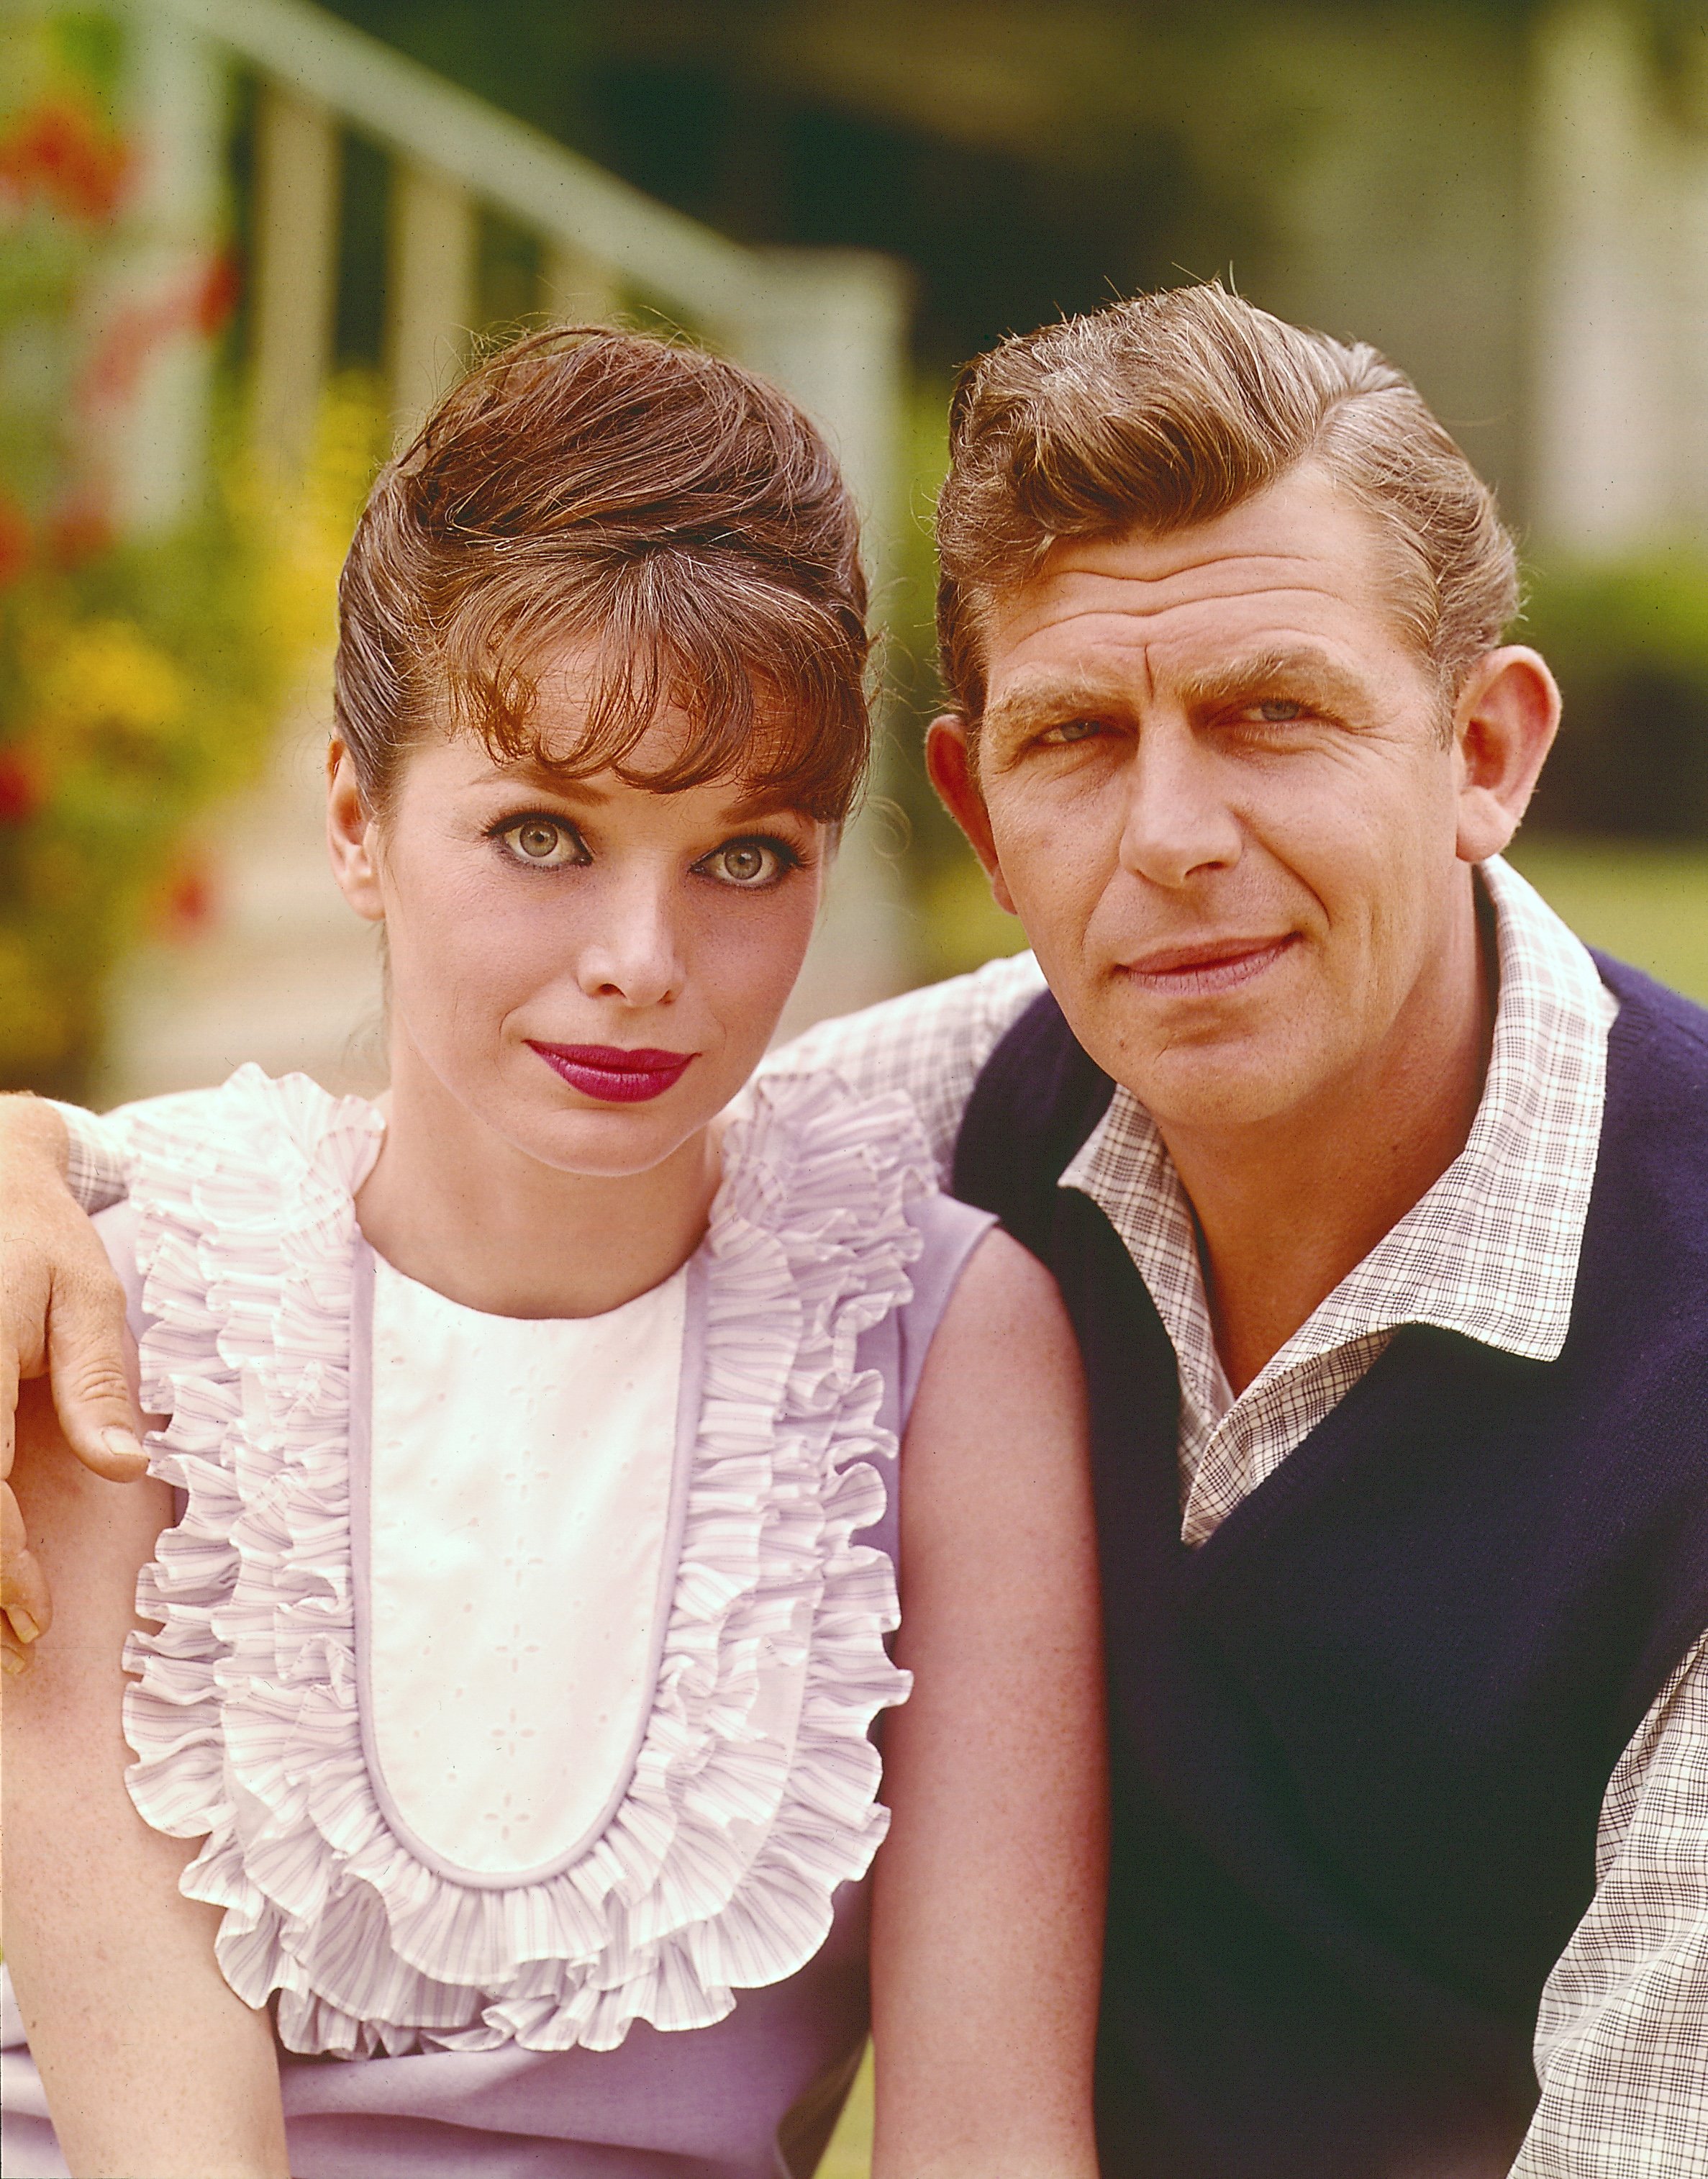 Aneta Corsaut and Andy Griffith on the set of "The Andy Griffith Show" circa 1965 | Source: Getty Images